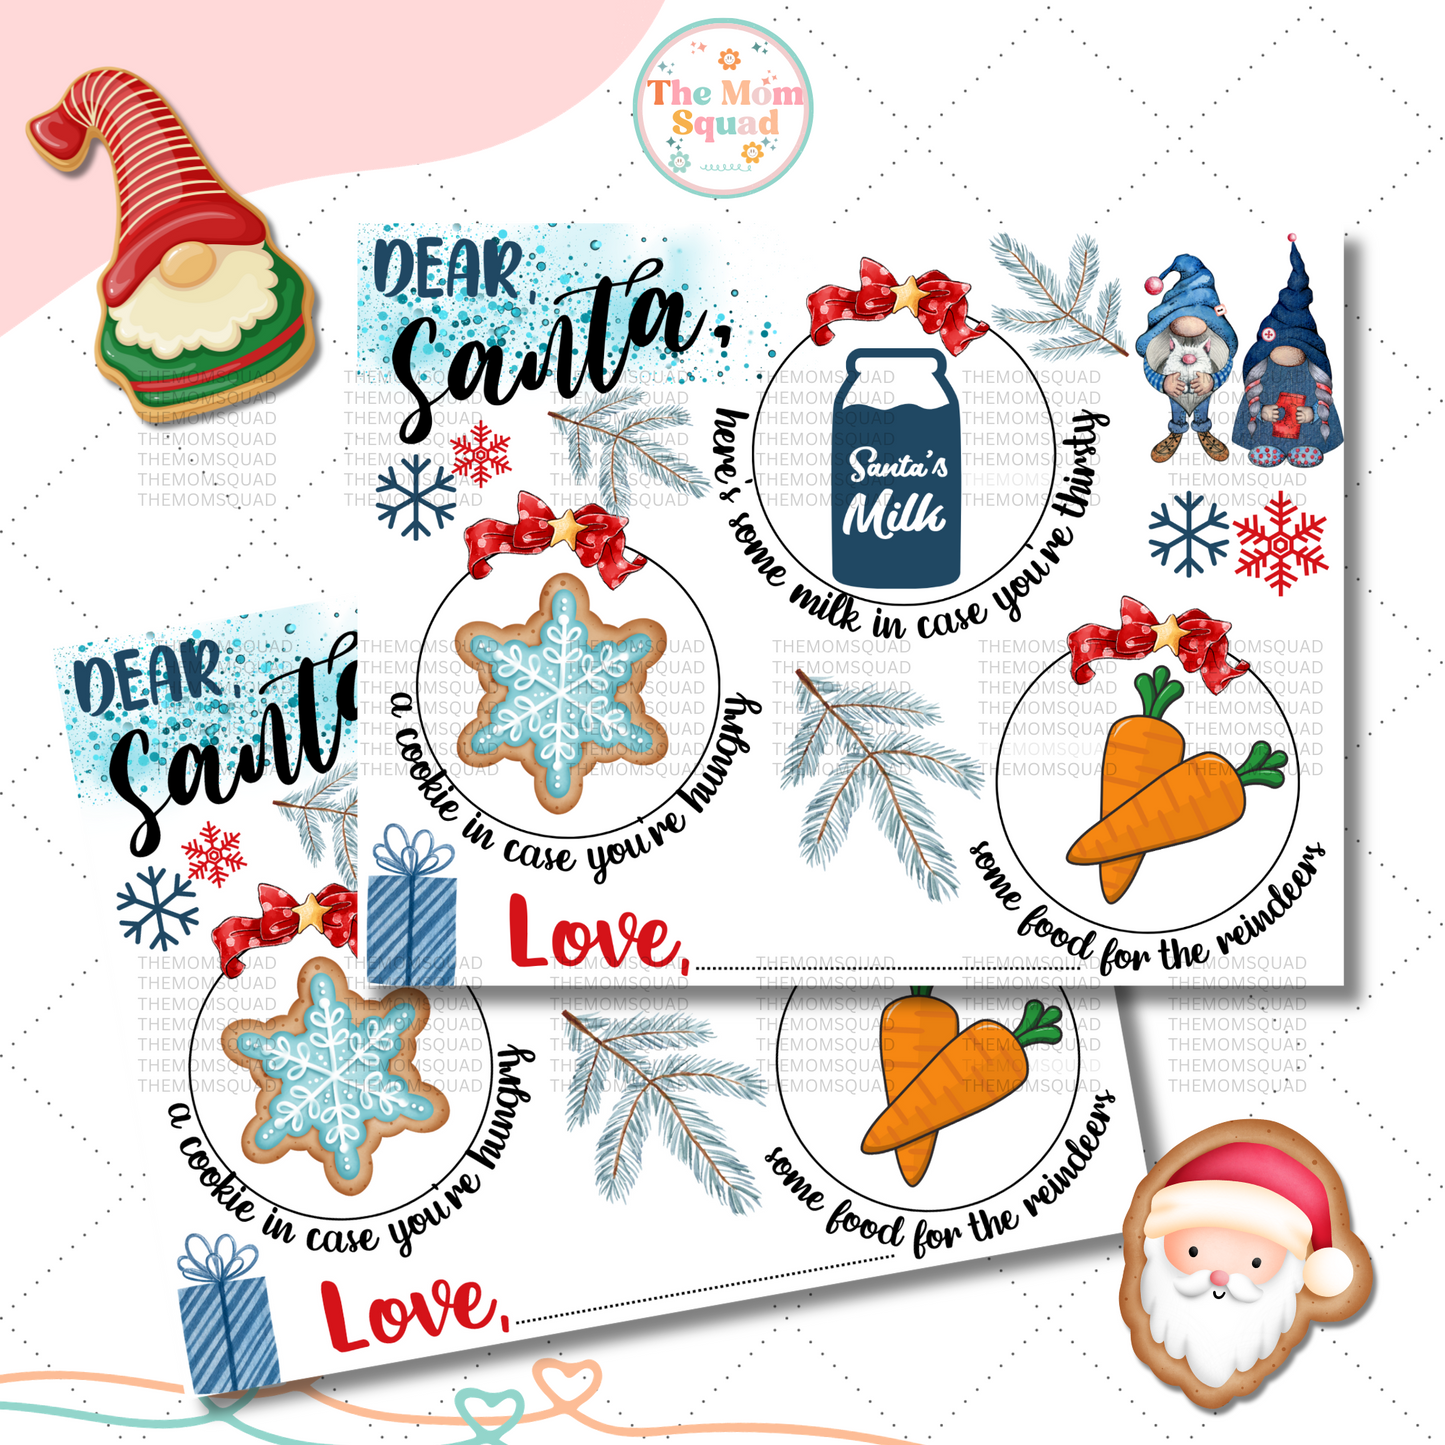 Spread Holiday Cheer: Printable Dear Santa Cookie and Milk Tray Placemat – Whimsical Design for Festive Festivities!